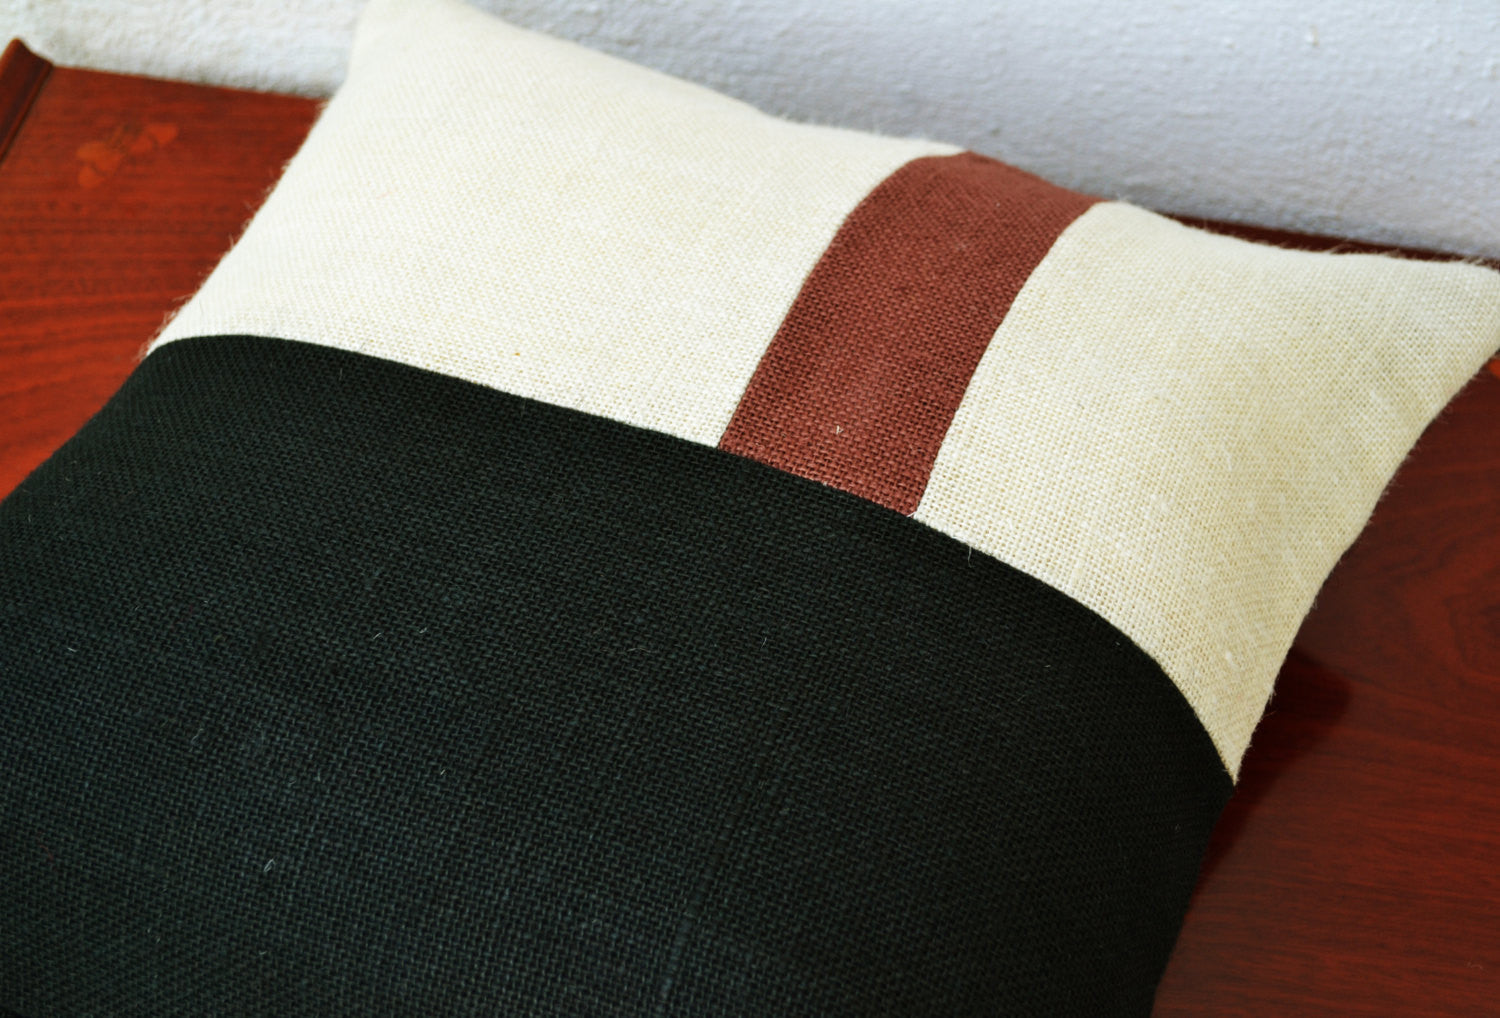 Handmade burlap accent pillow cover with geometric color block